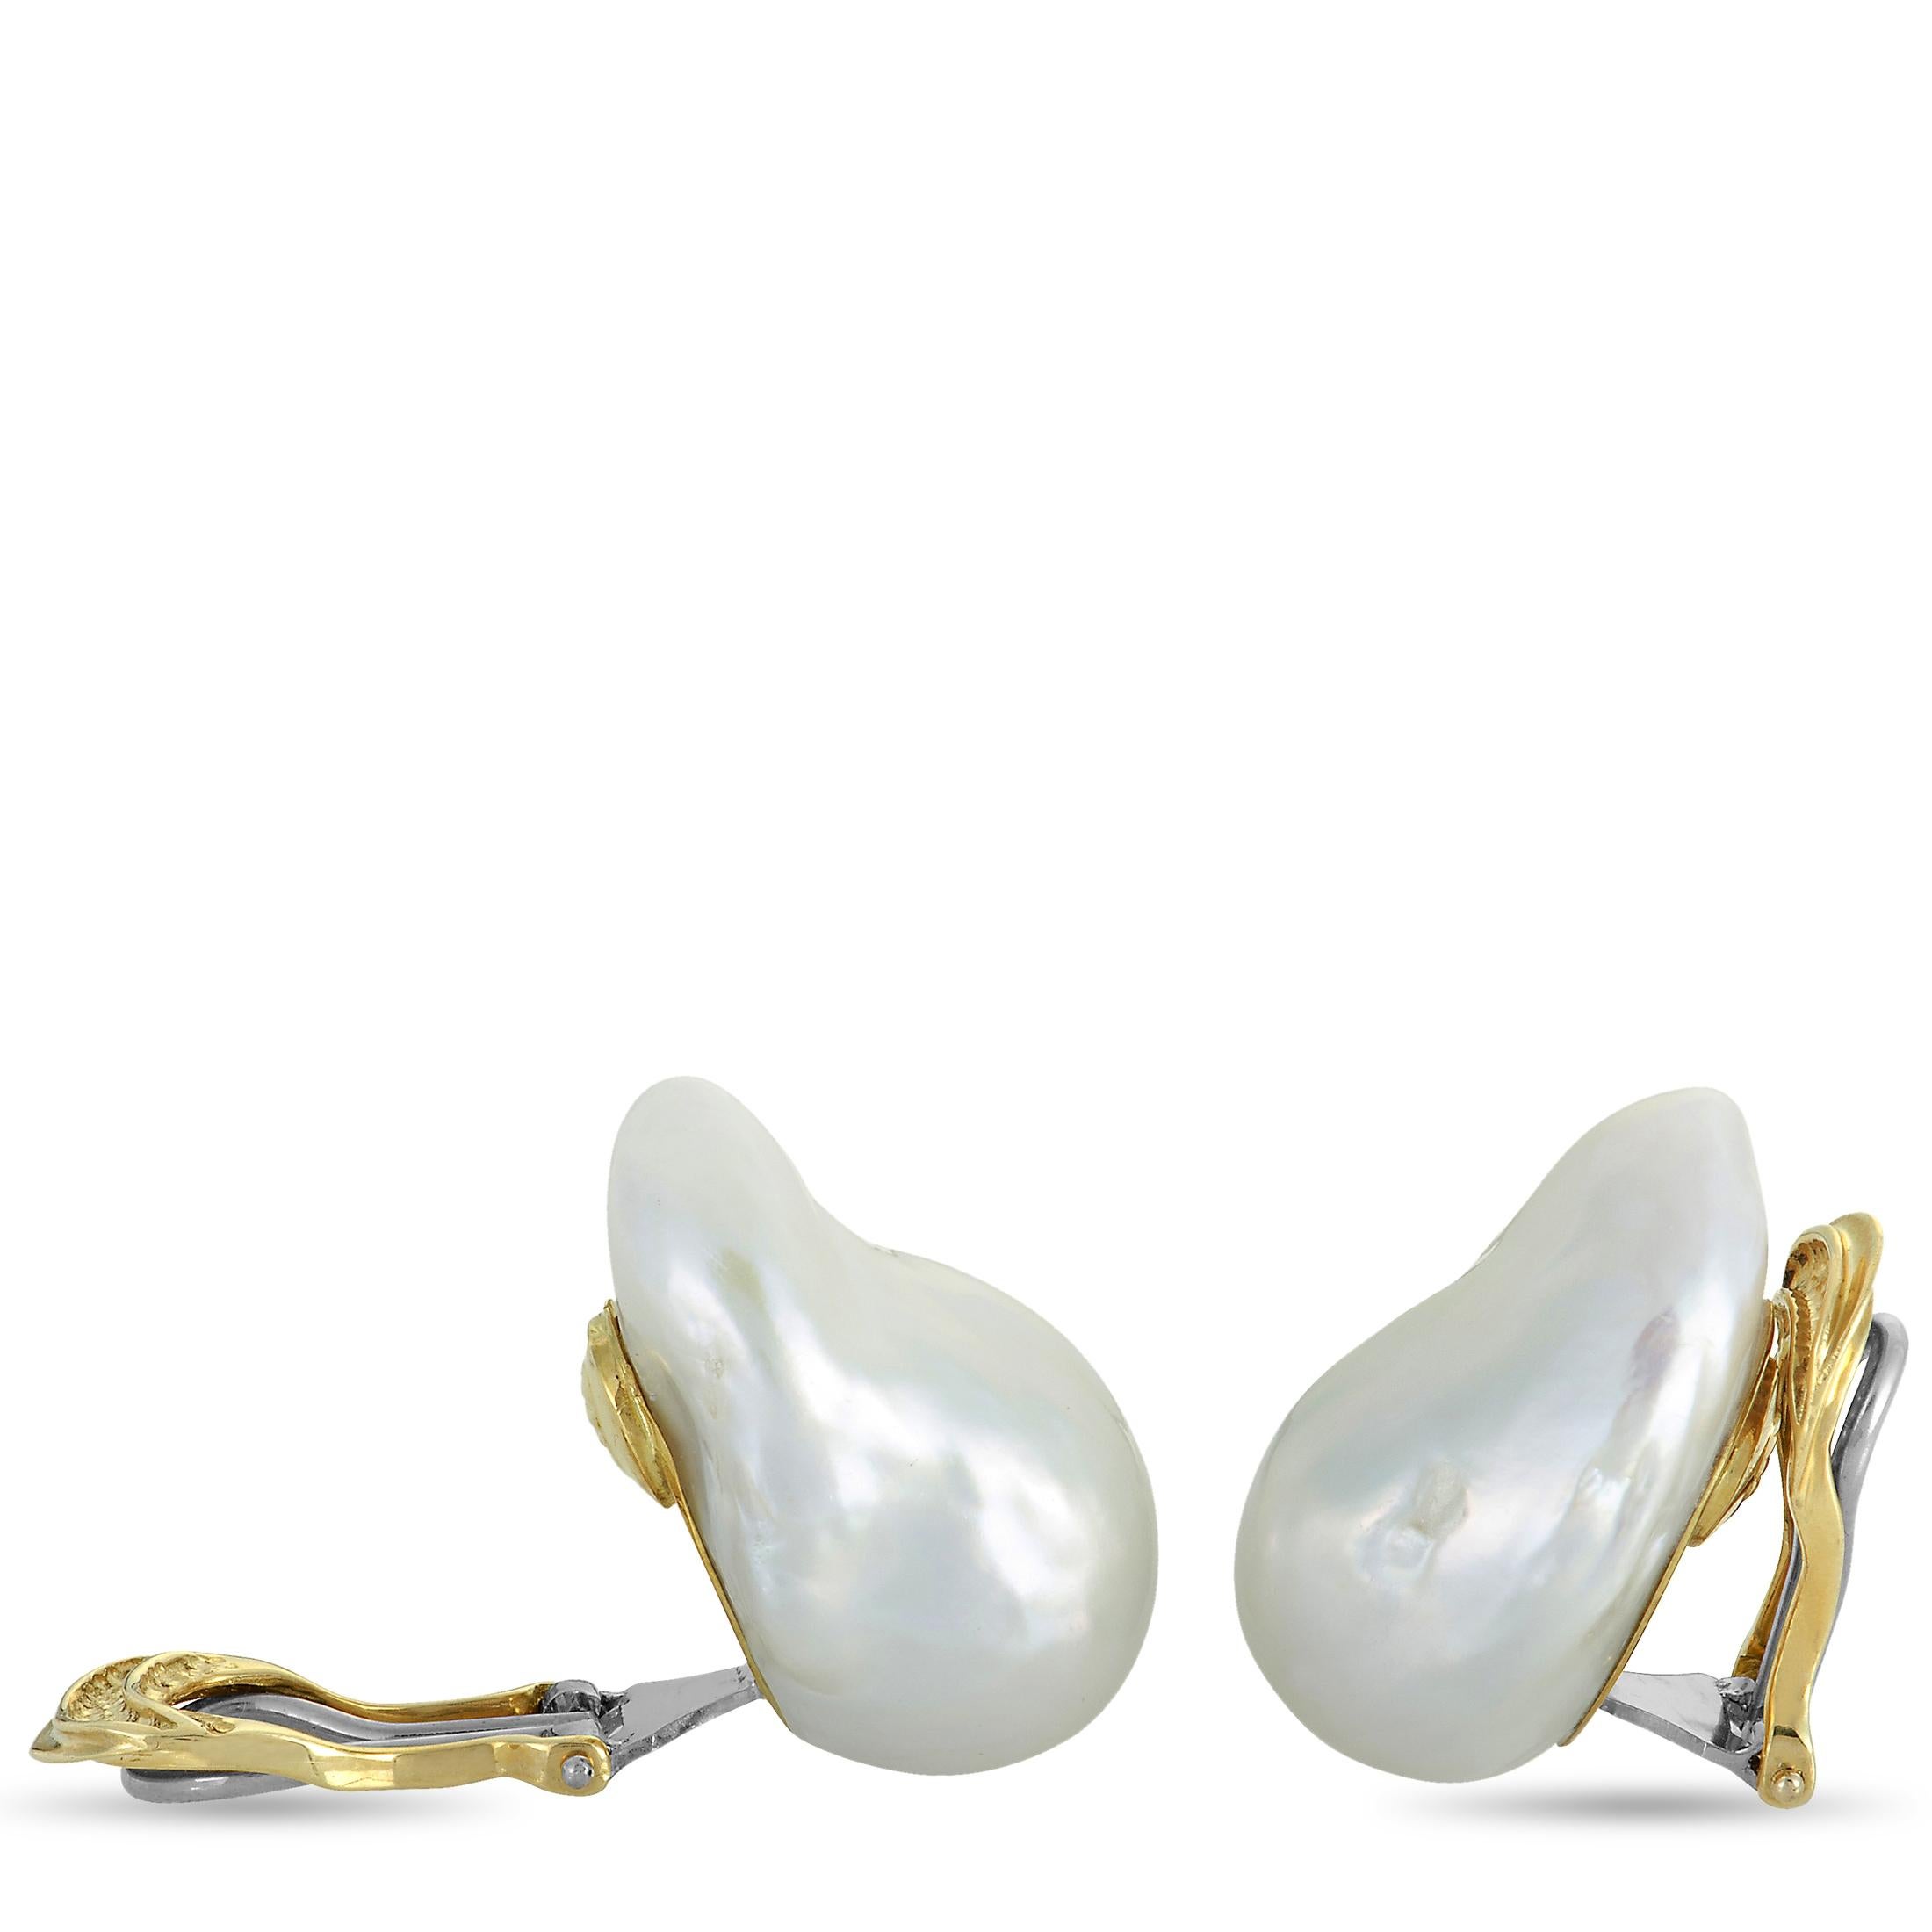 This pair of earrings by Yvel is made of 18K yellow gold and set with pearls. Each of the two earrings weighs 13.25 grams and they measure 1” in length and 0.70” in width.
 
 The earrings are offered in brand new condition and include the